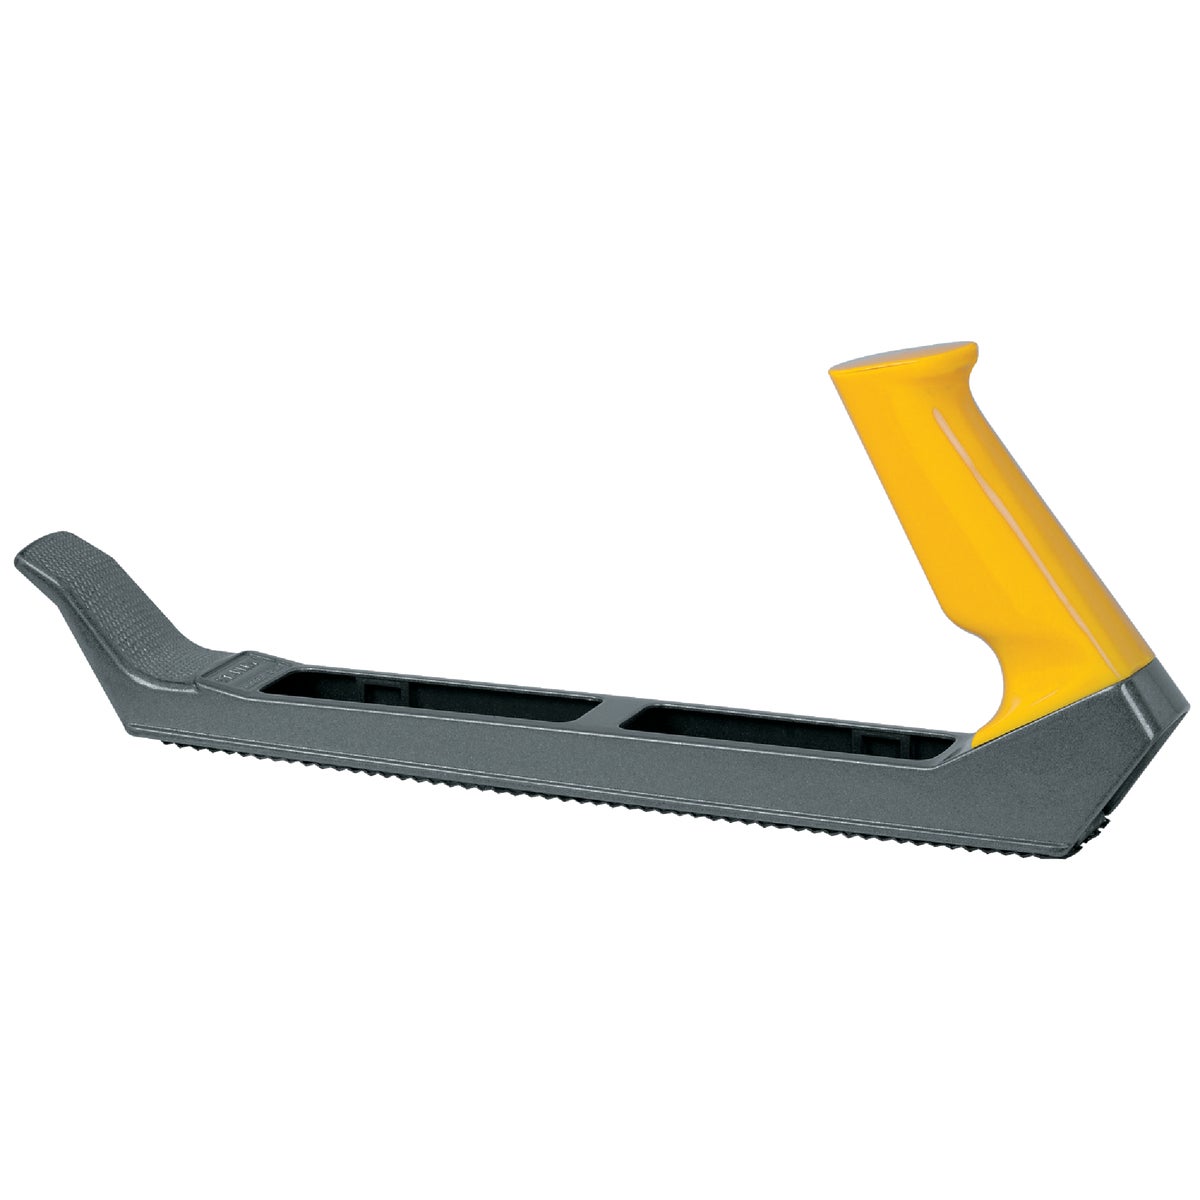 Stanley Plane Type Surform Plane with 10 In. Blade